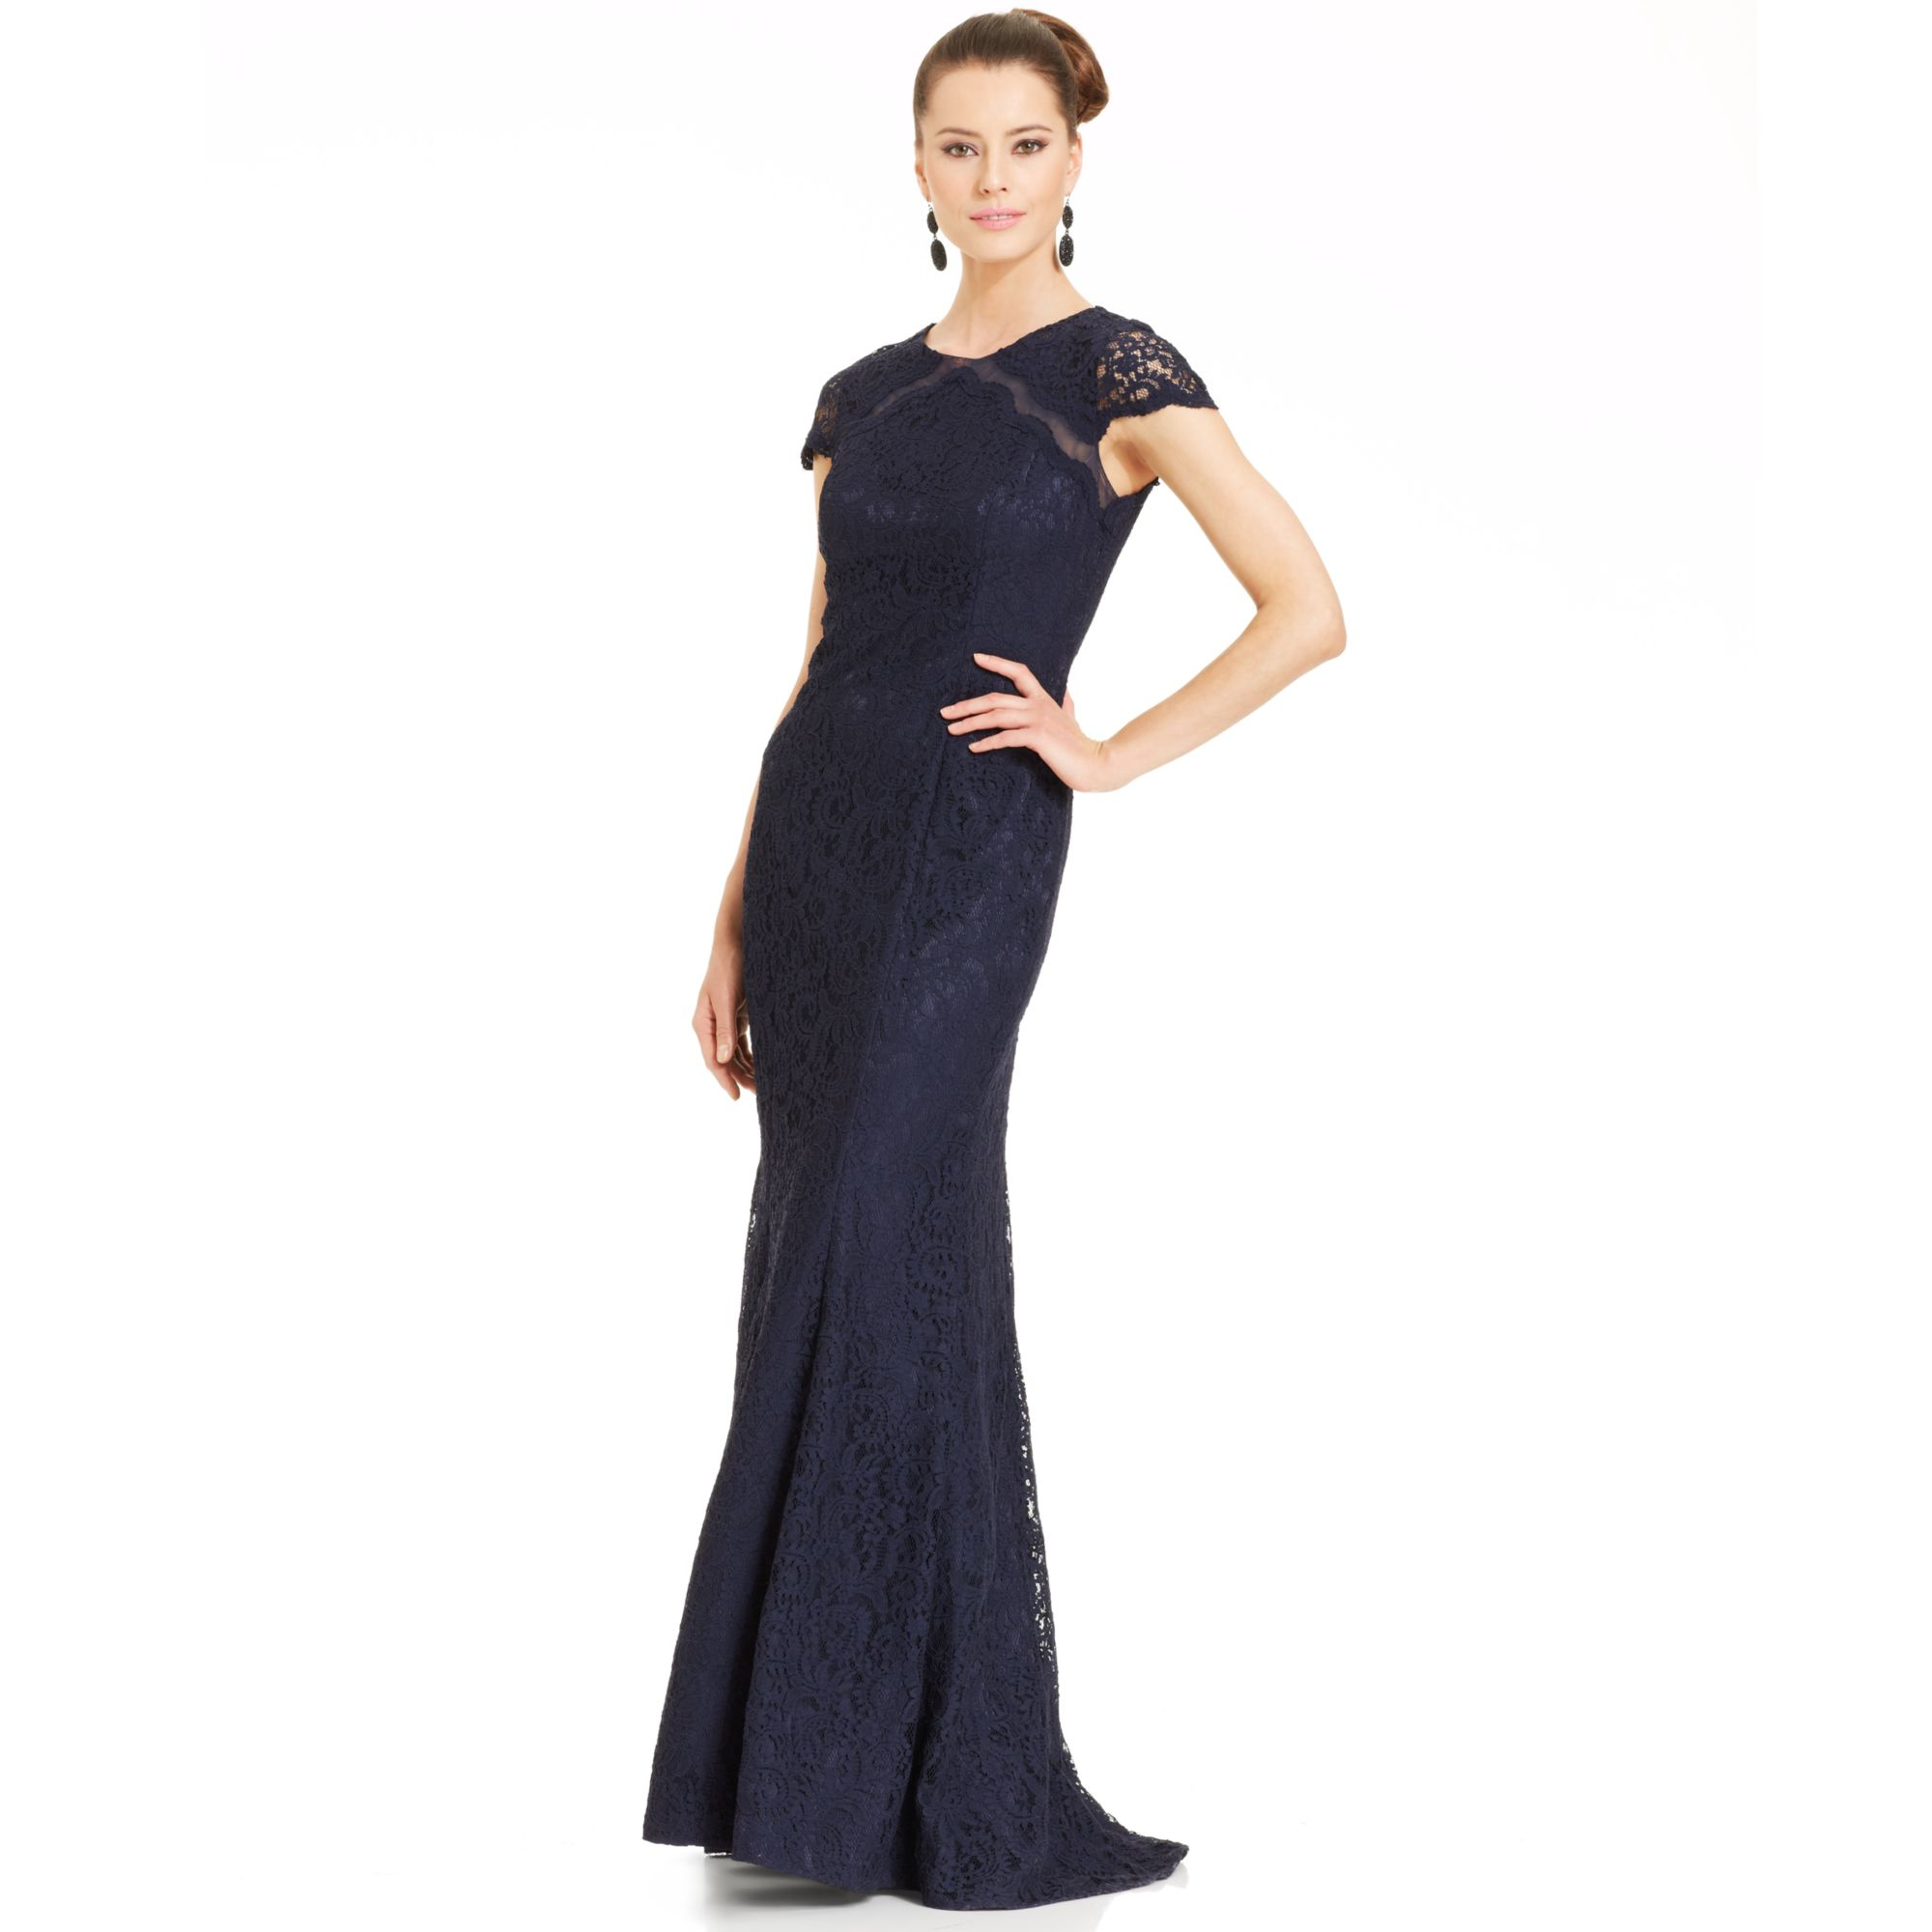 Lyst - Js collections Js Boutique Capsleeve Lace Mermaid Gown in Blue